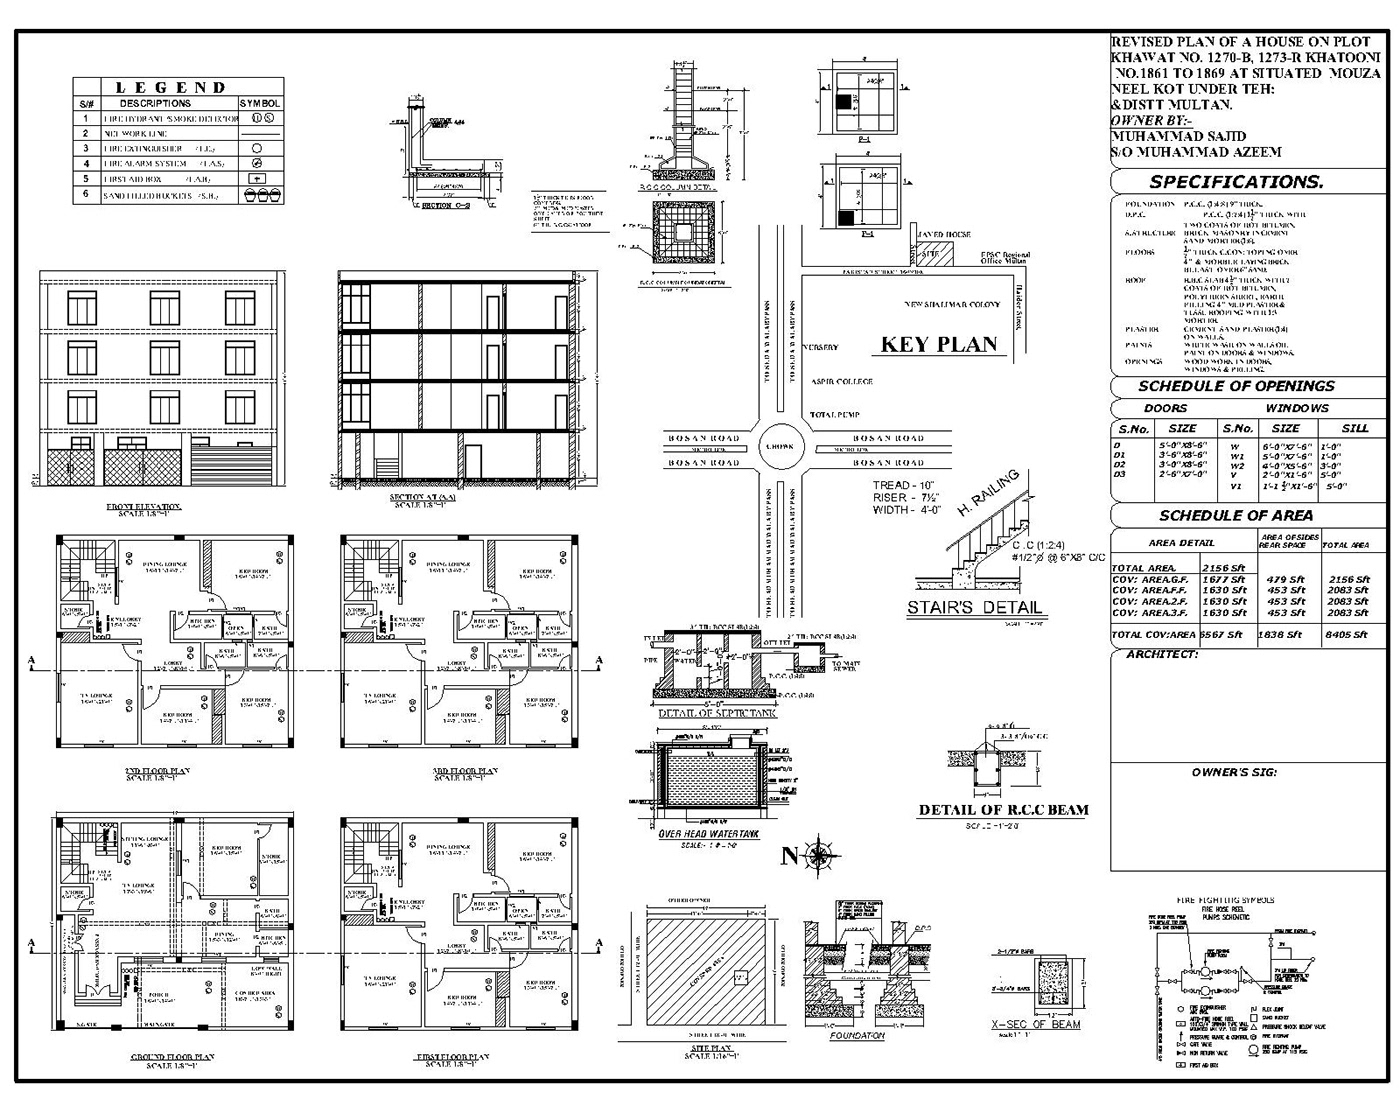 2d drawings architecture design Drawing  Elevation section specifications submission